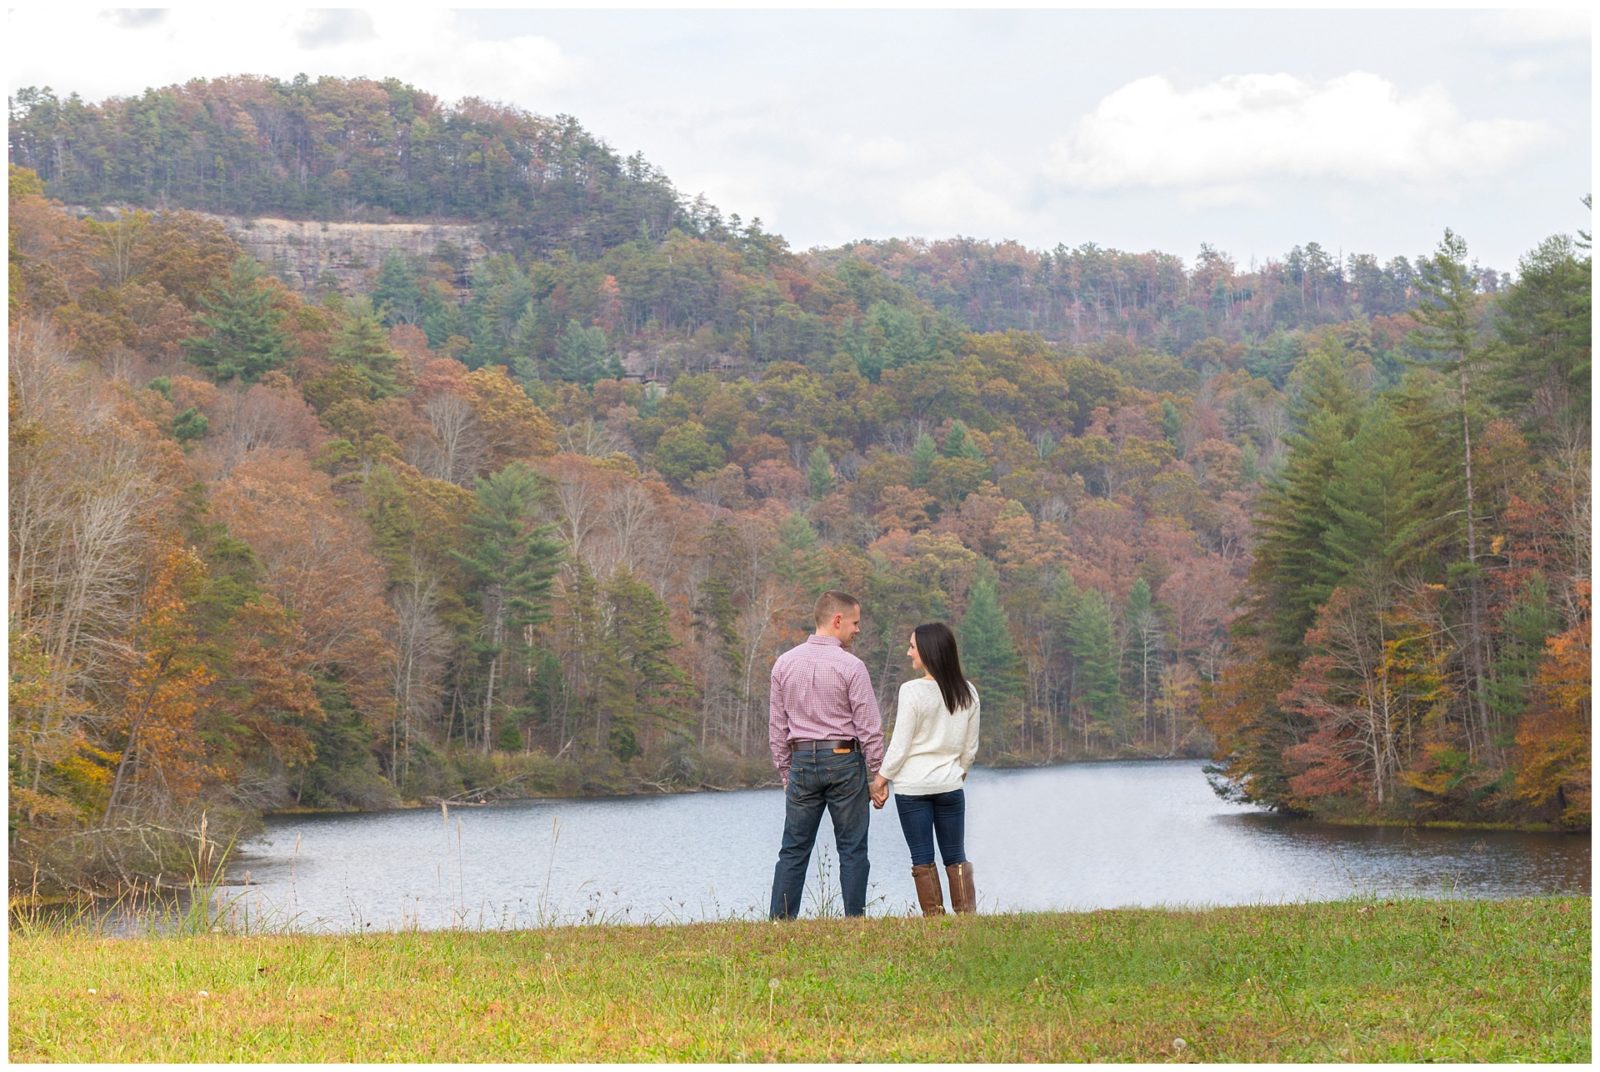 Stunning outdoor fall Red River Gorge engagement session where we visited Mill Creek Lake, Princess Arch and Chimney Top Rock in Kentucky. Photo by Kevin and Anna Photography www.kevinandannaweddings.com